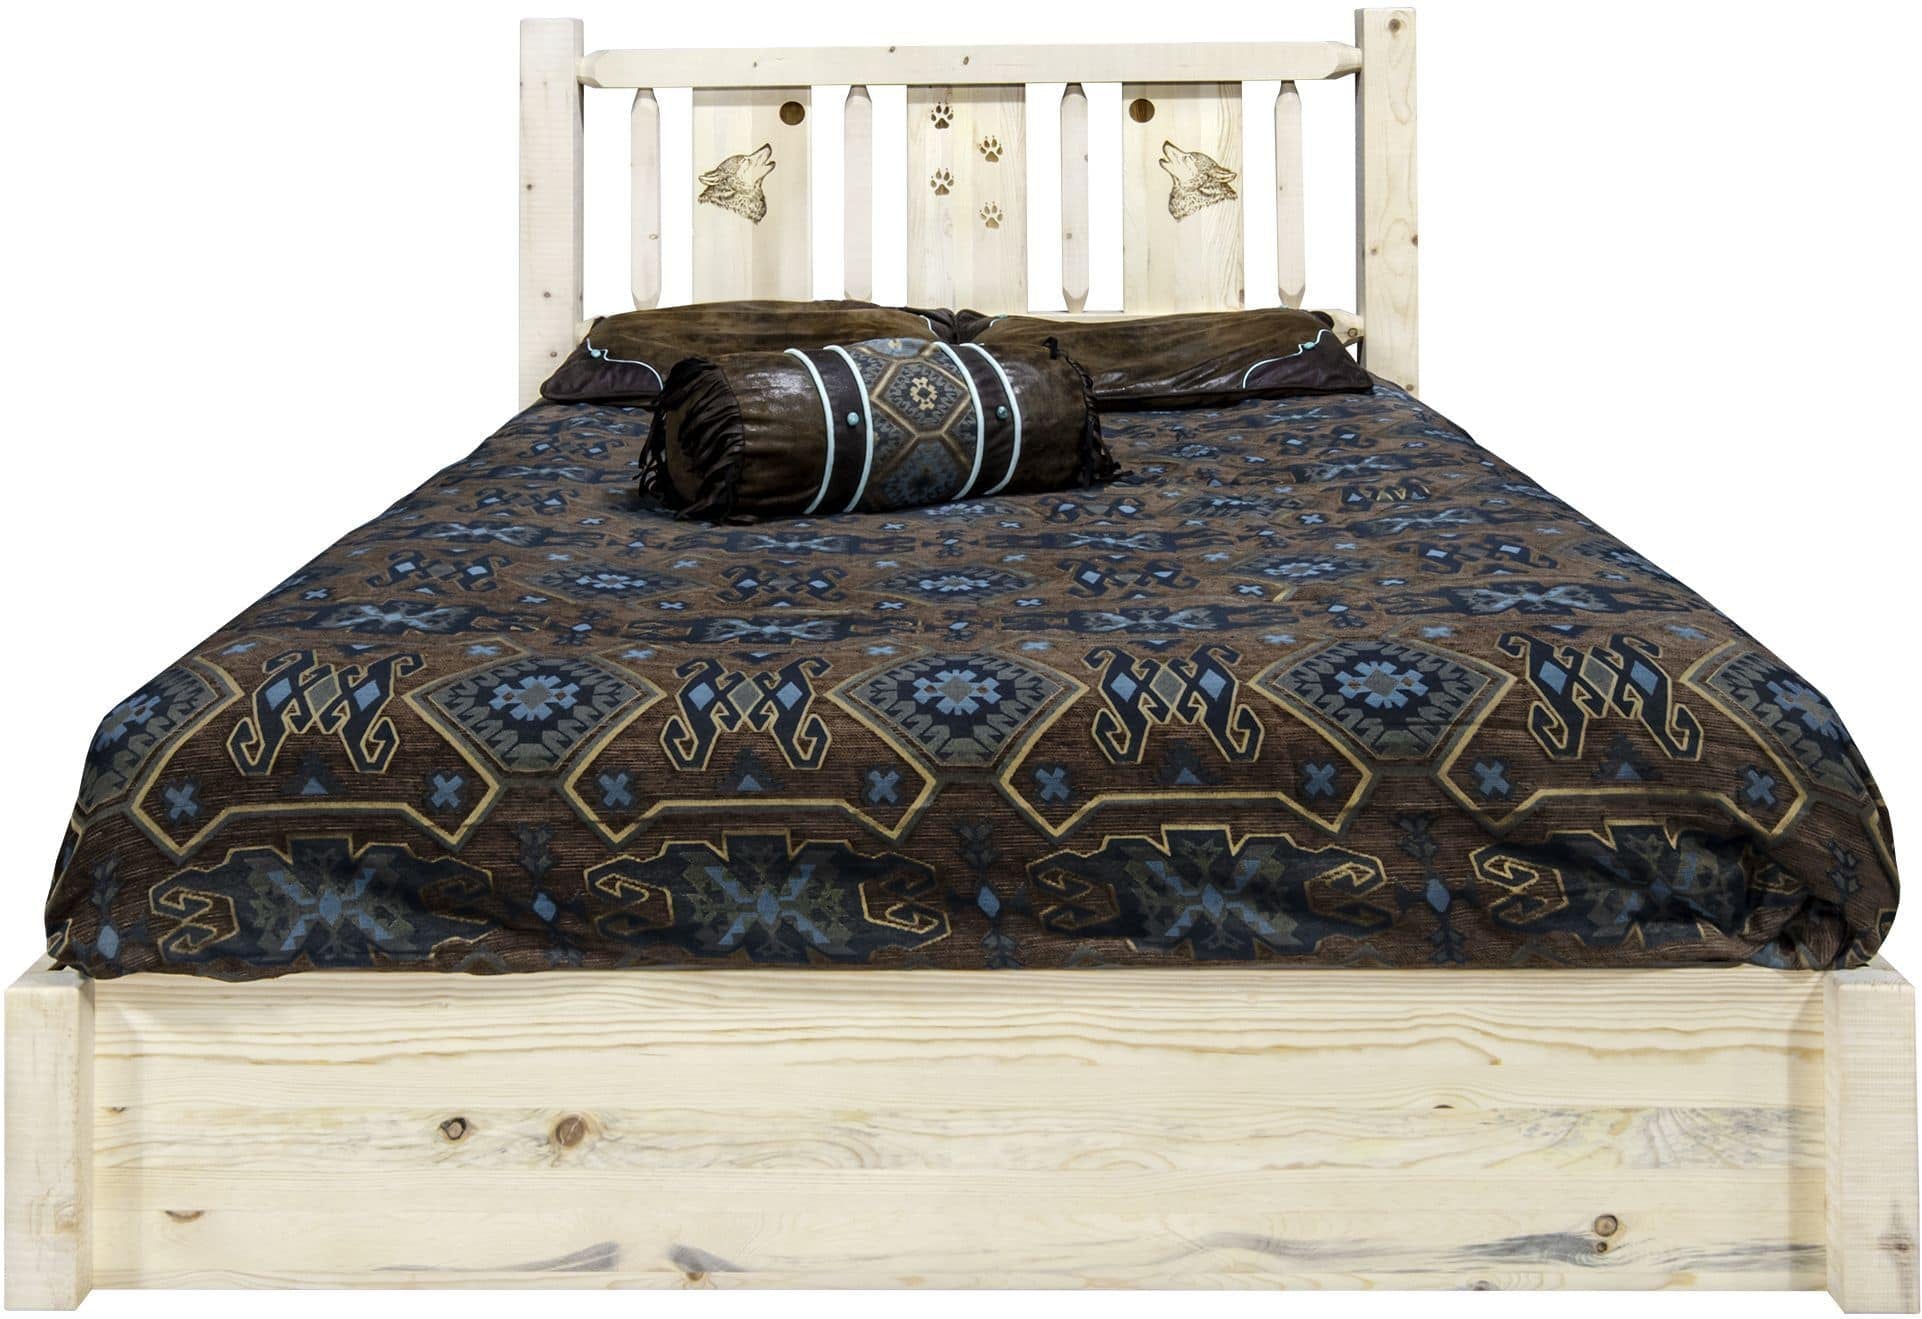 Montana Woodworks Homestead Collection Queen Storage Platform Bed with Laser Engraved Design - Clear Lacquer Finish-Rustic Furniture Marketplace